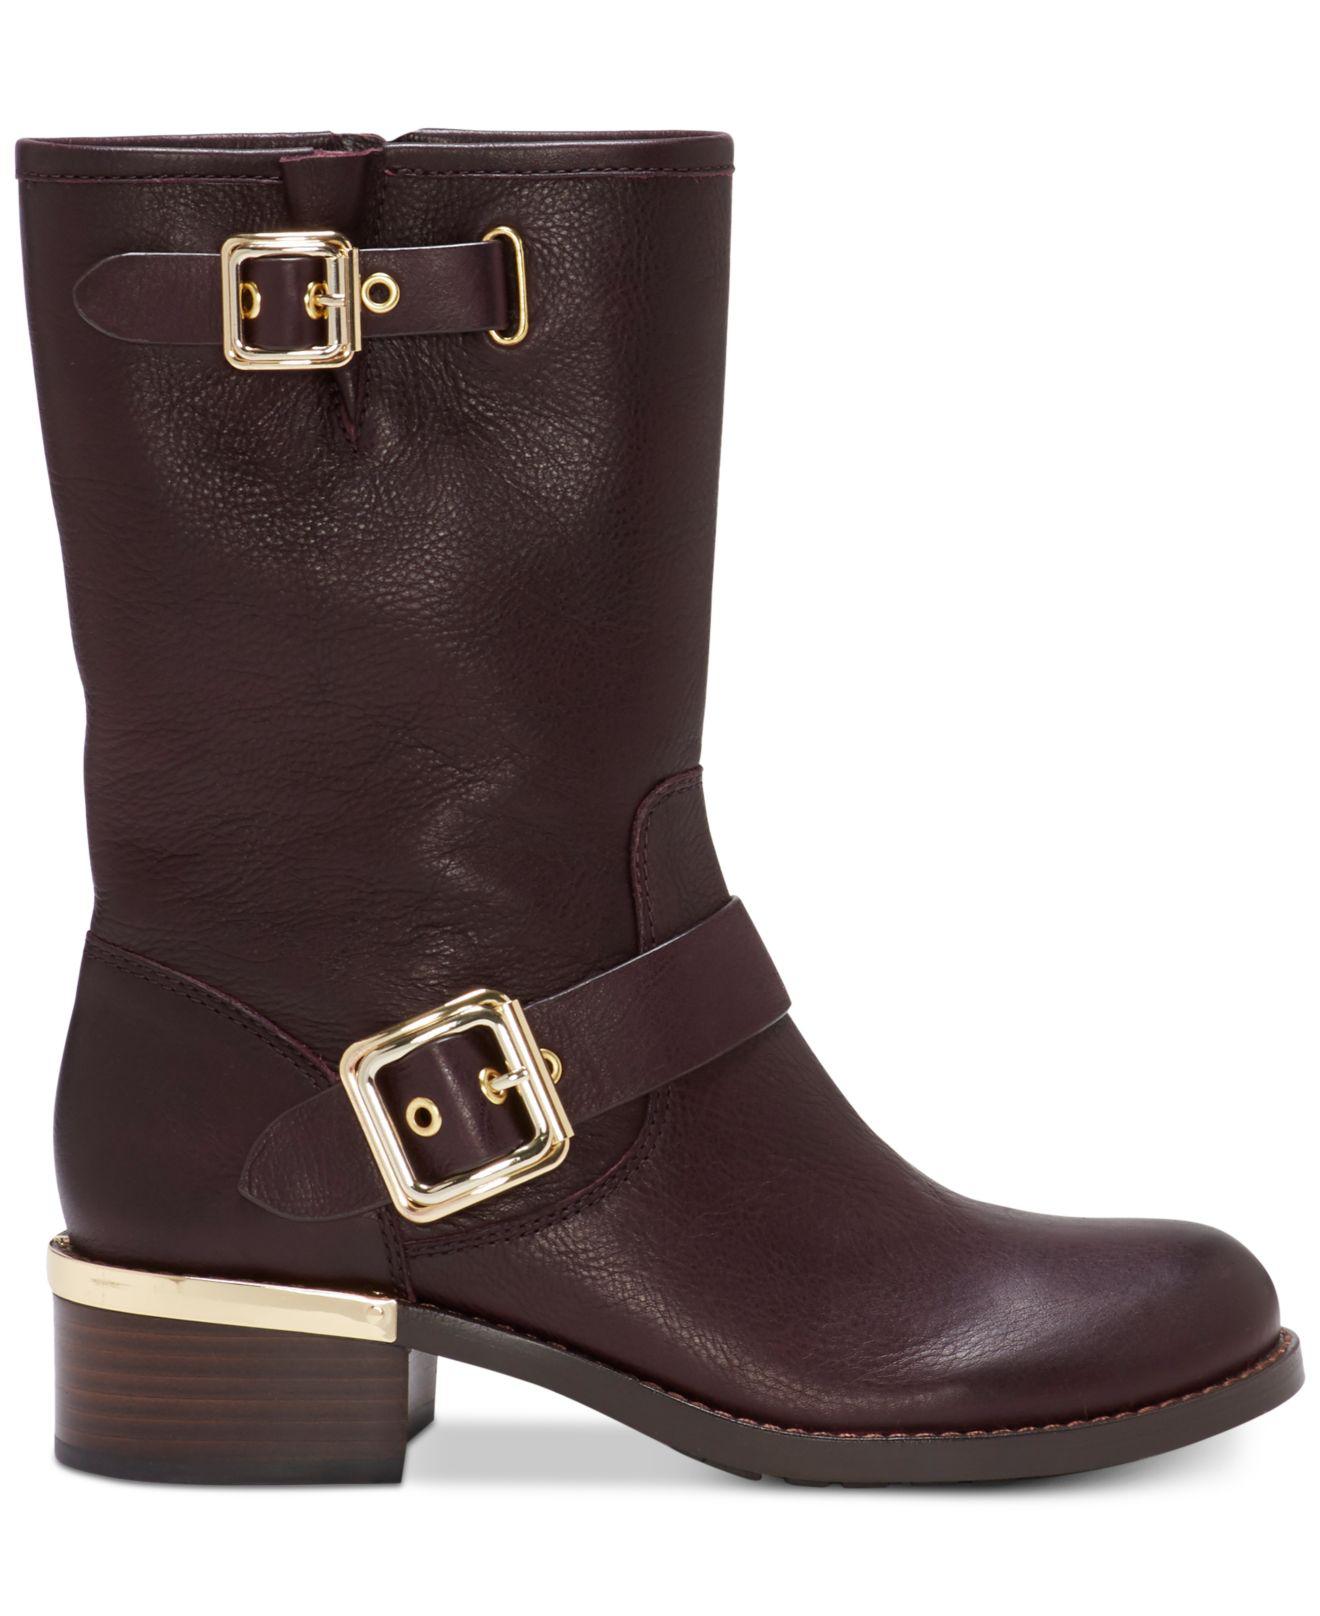 Vince Camuto Leather Windy Moto Boots in Dark Brown (Brown